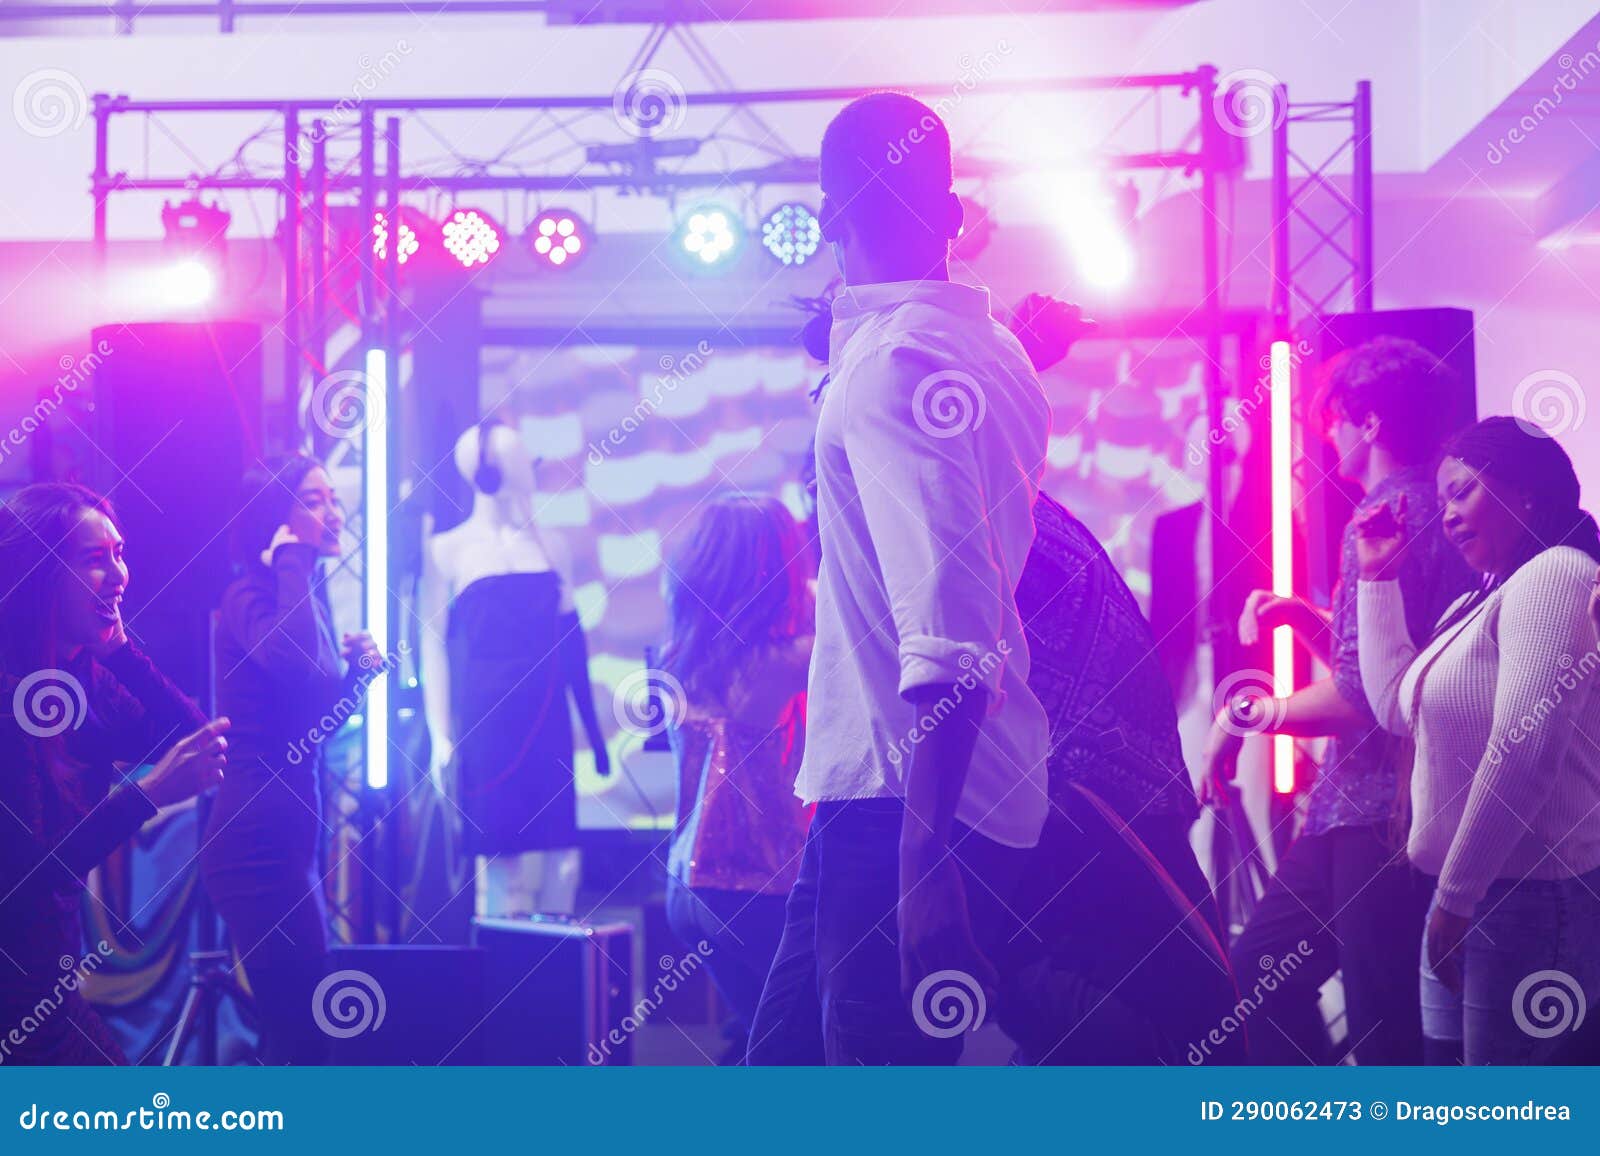 People Dancing and Partying in Club Stock Image - Image of move ...